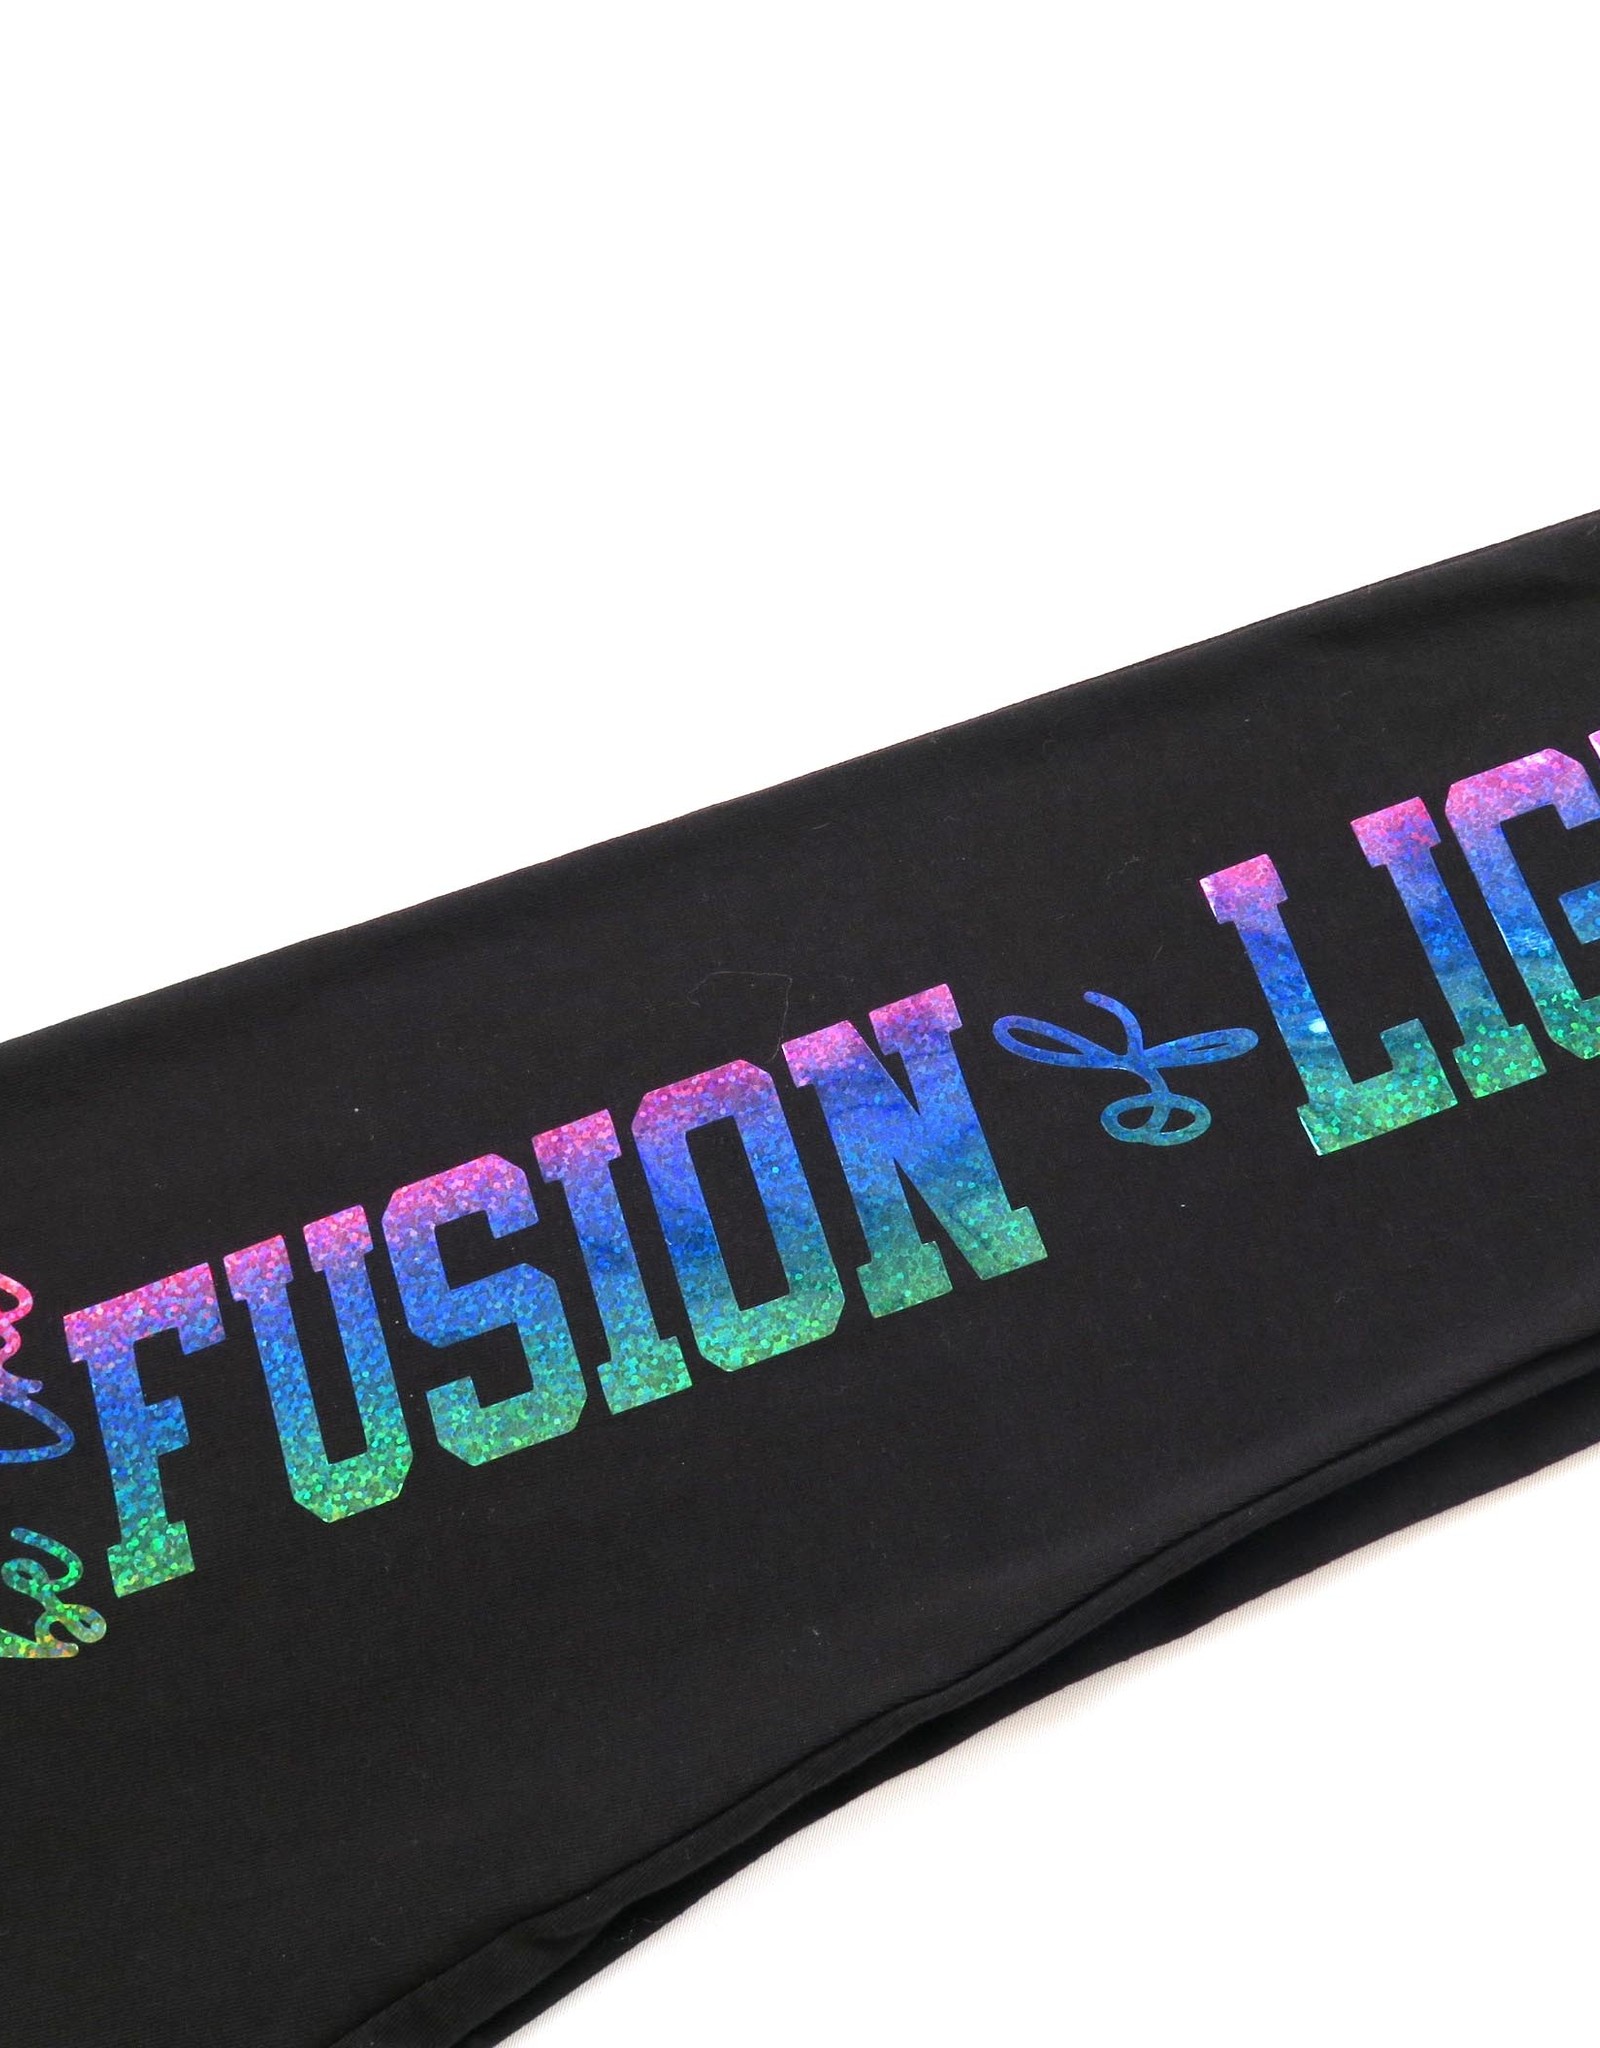 T Star Collection "Be The Fusion of Light" Leggings (XL) by T Star Collection, Manifest Song Performer T Star Verse